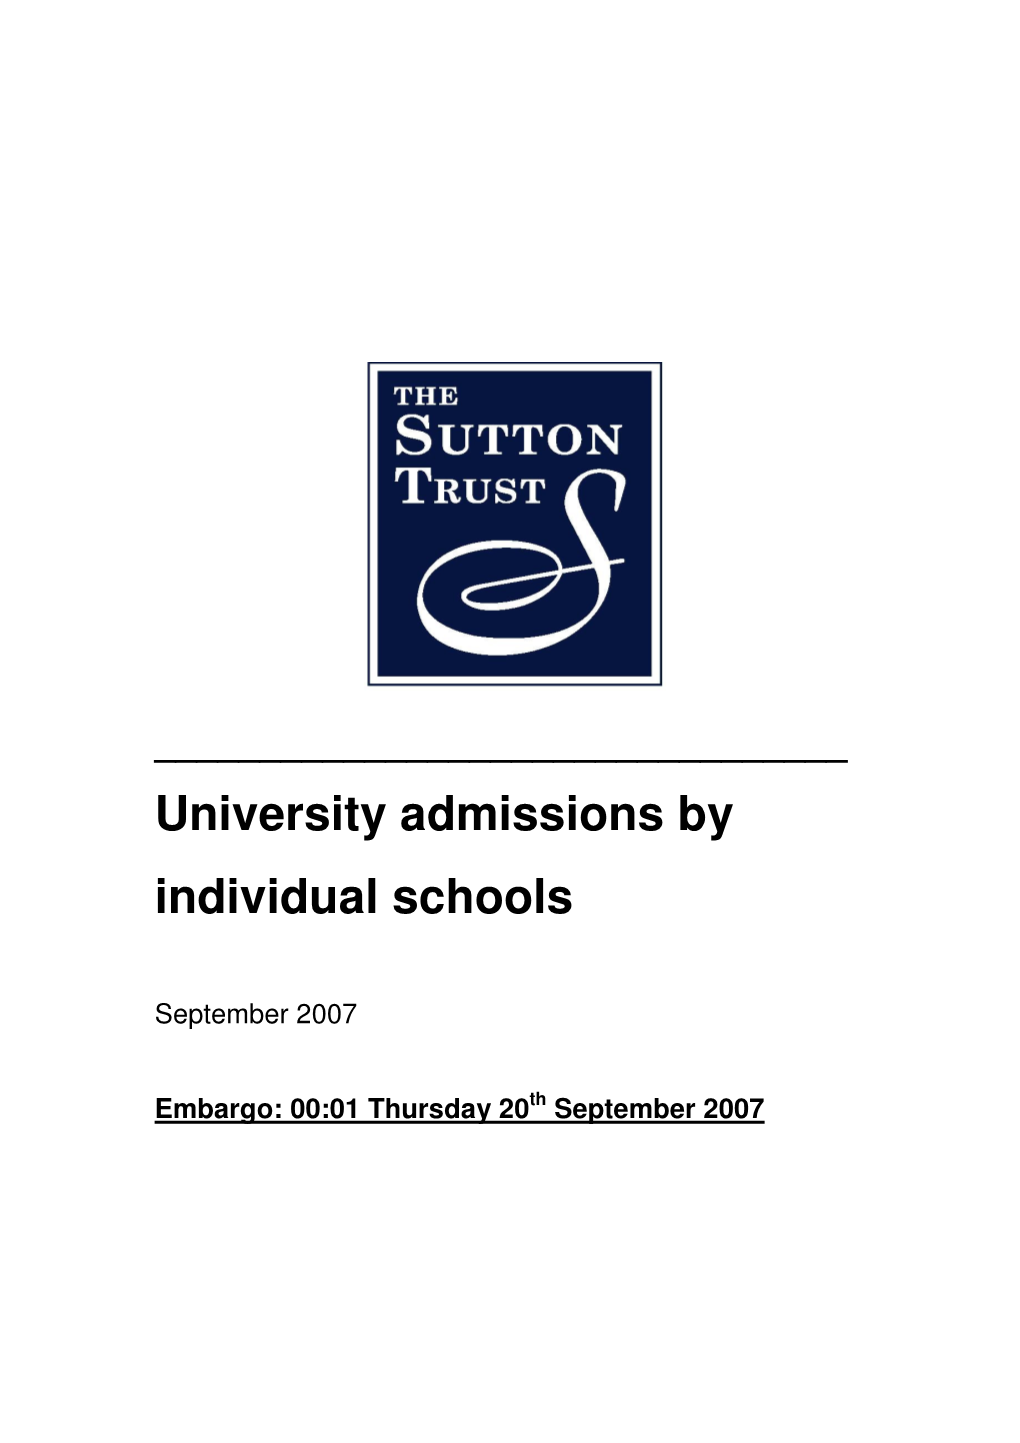 University Admissions by Individual Schools